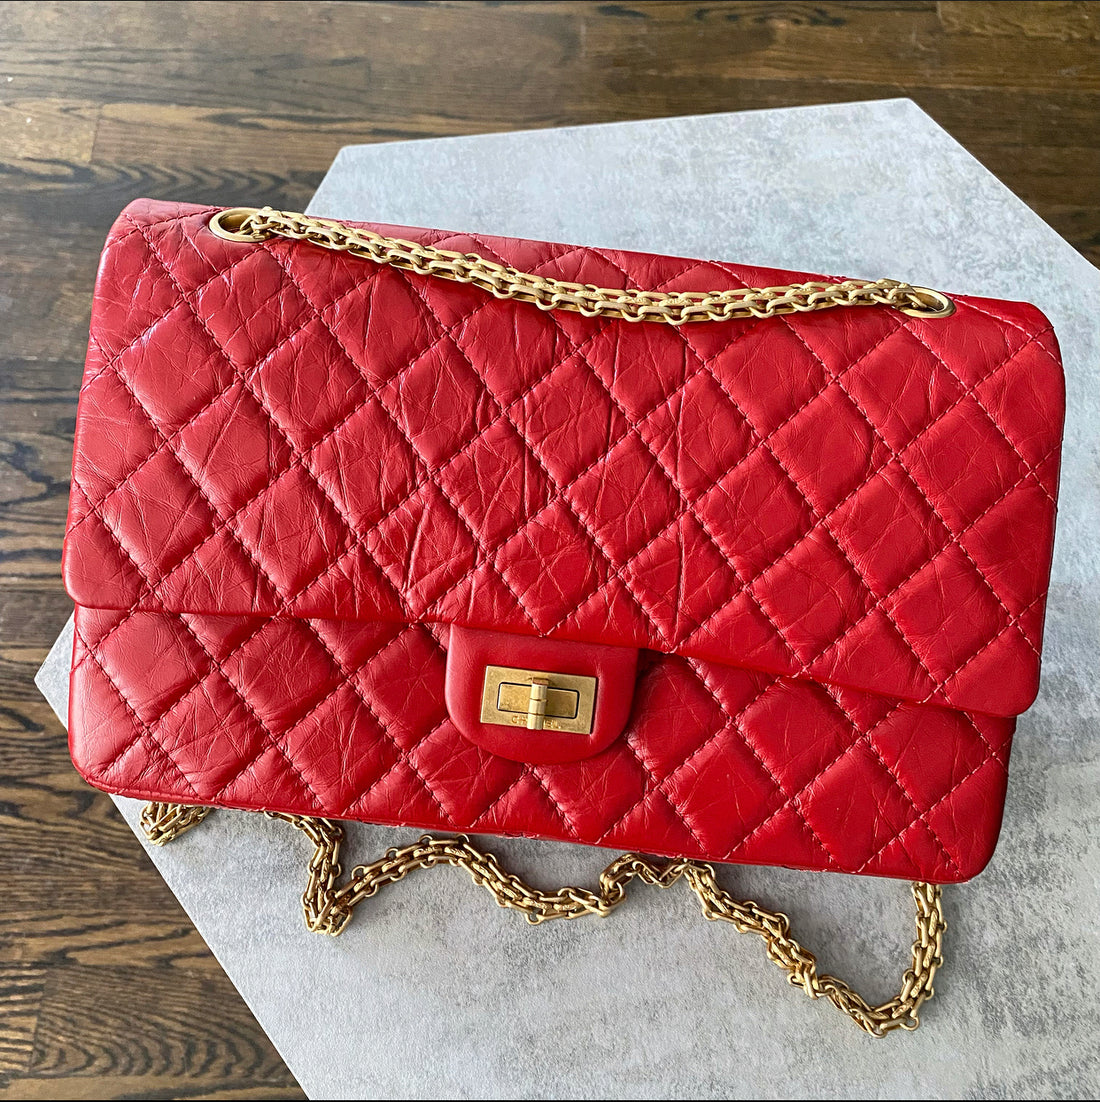 Chanel 2.55 Reissue 226 Large Red Aged Calfskin GHW Flap Bag